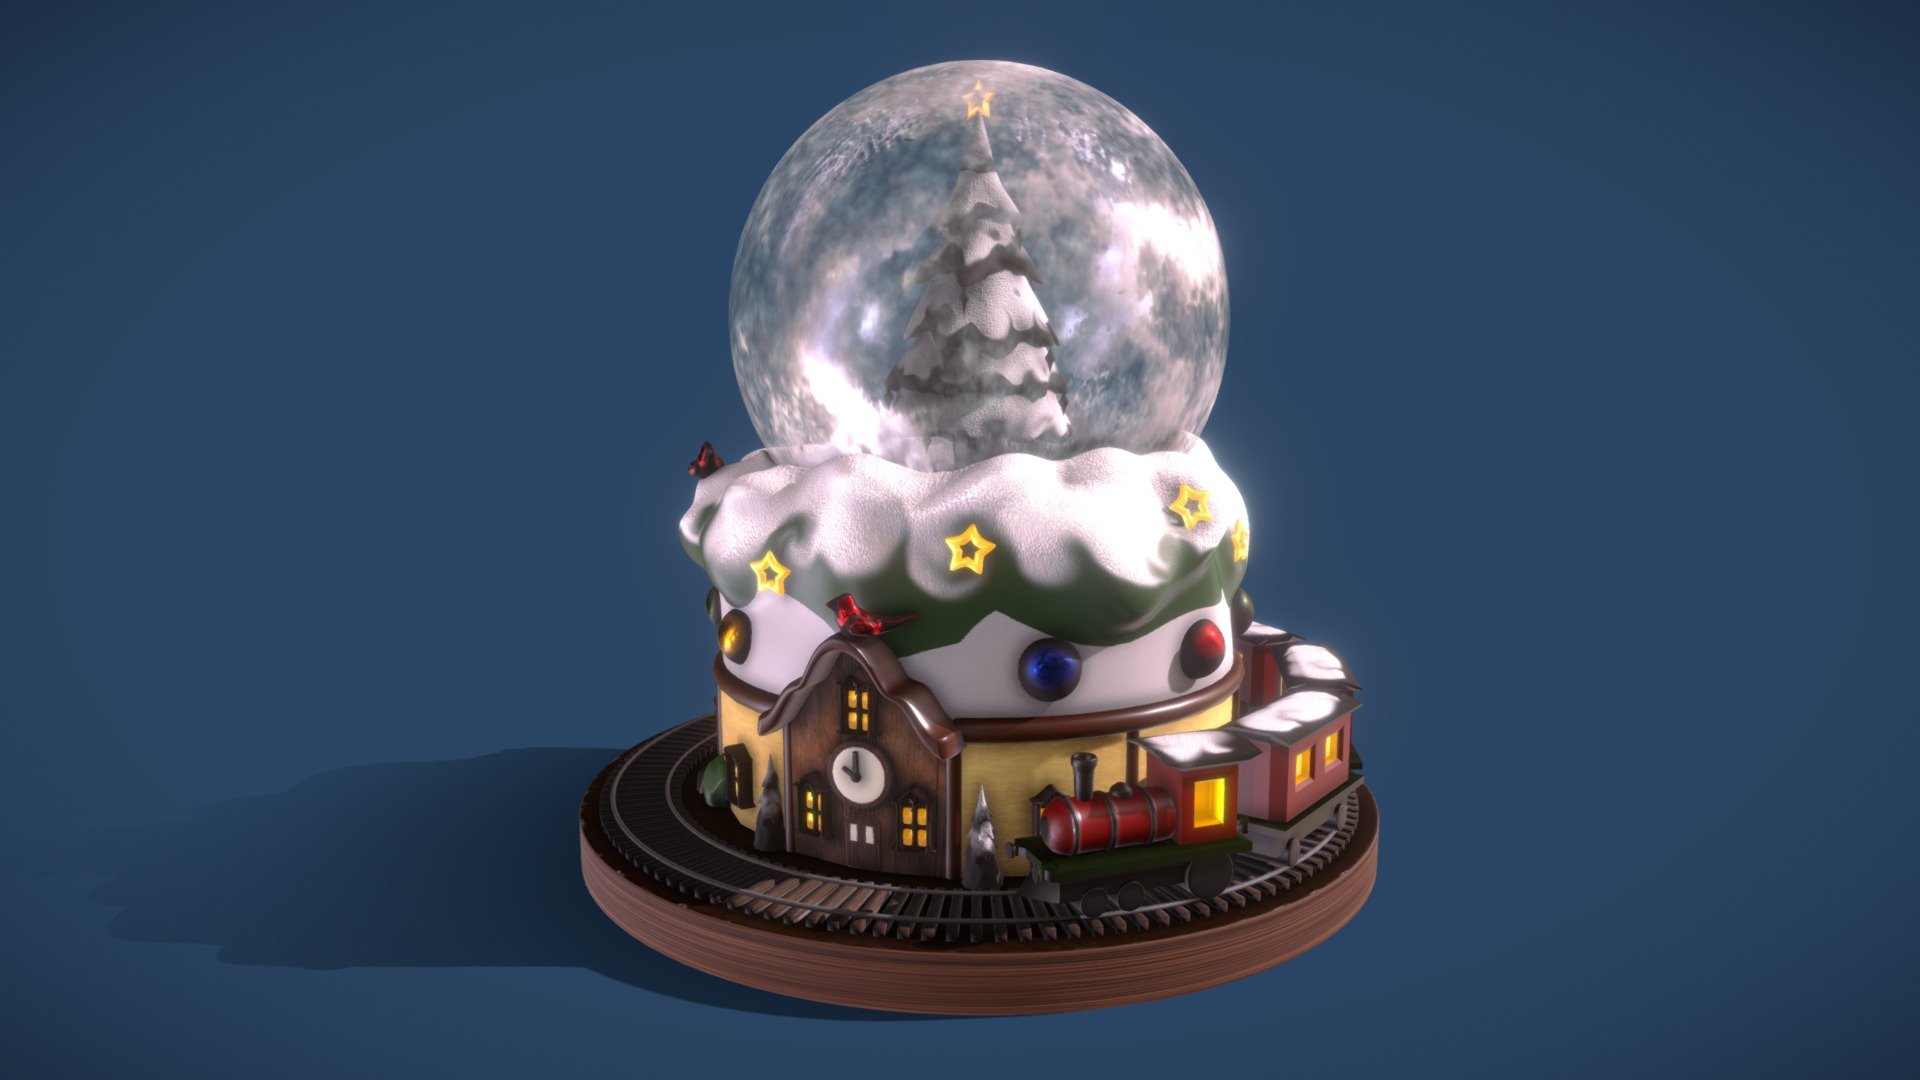 Chrismas snowglobe with trees, gifts and a train! - Christmas snowglobe - 3D model by icilaba (@laba39) 3d model